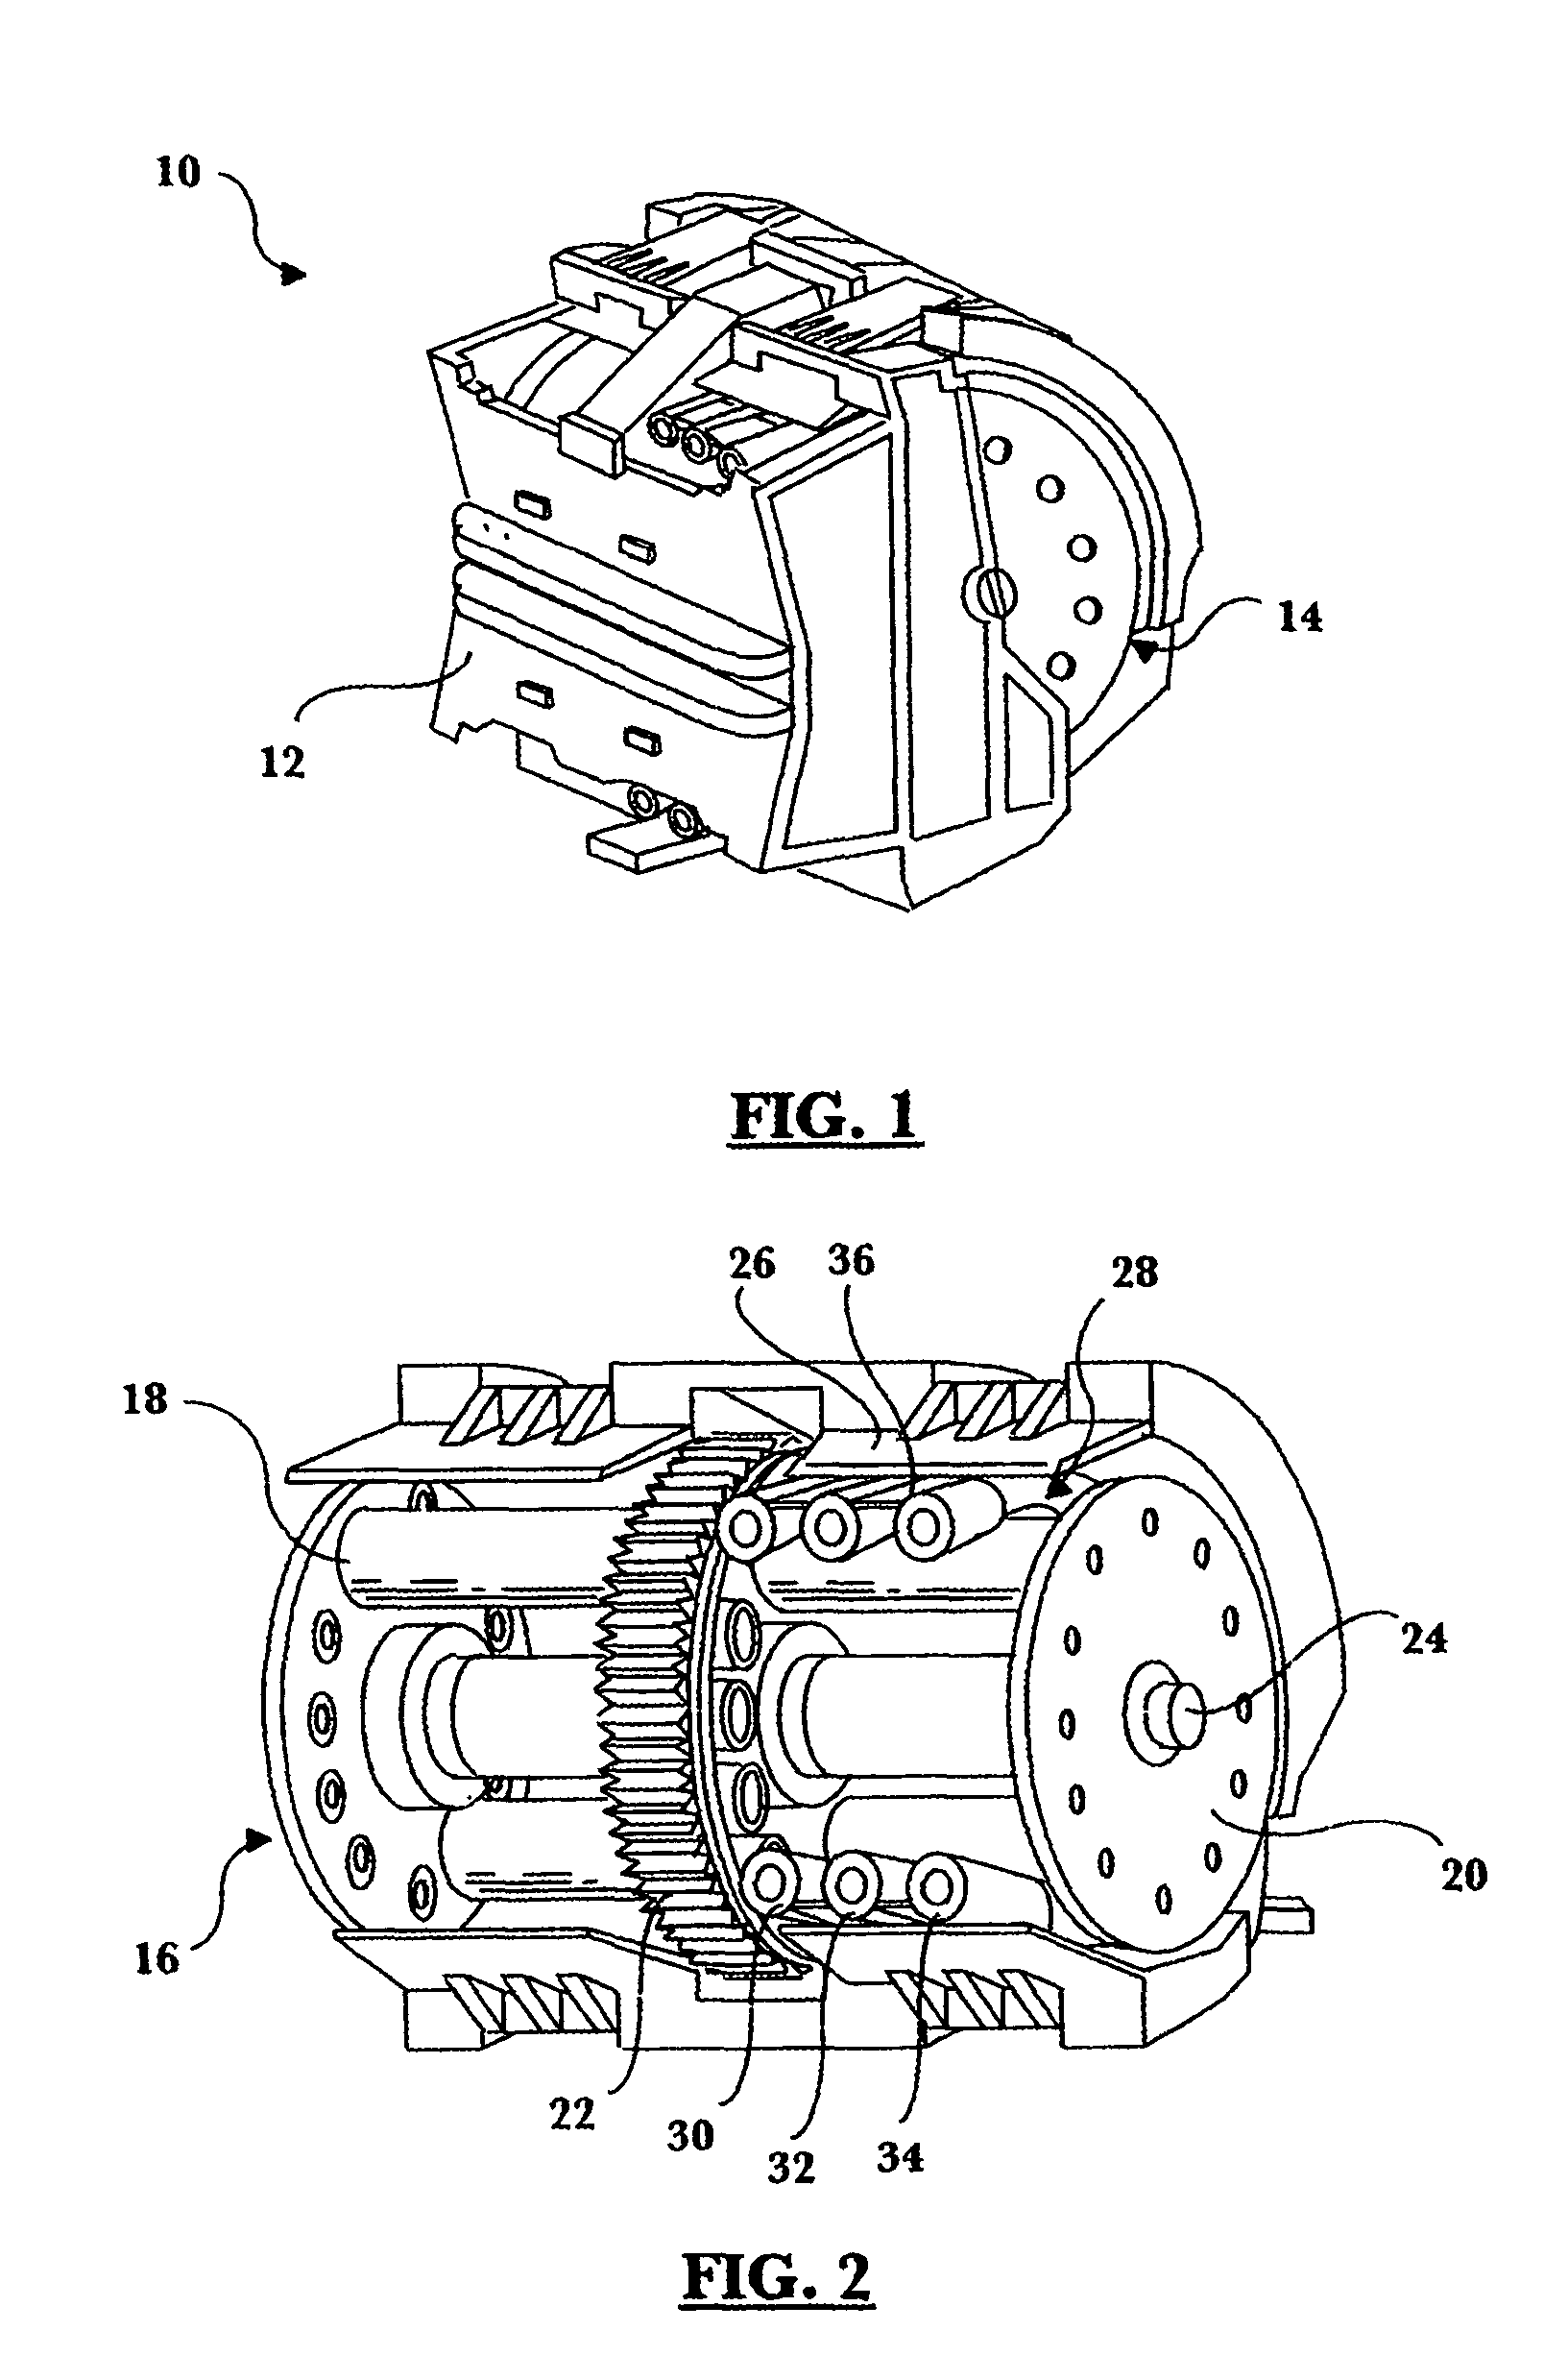 Peristaltic pump with roller pinch valve control